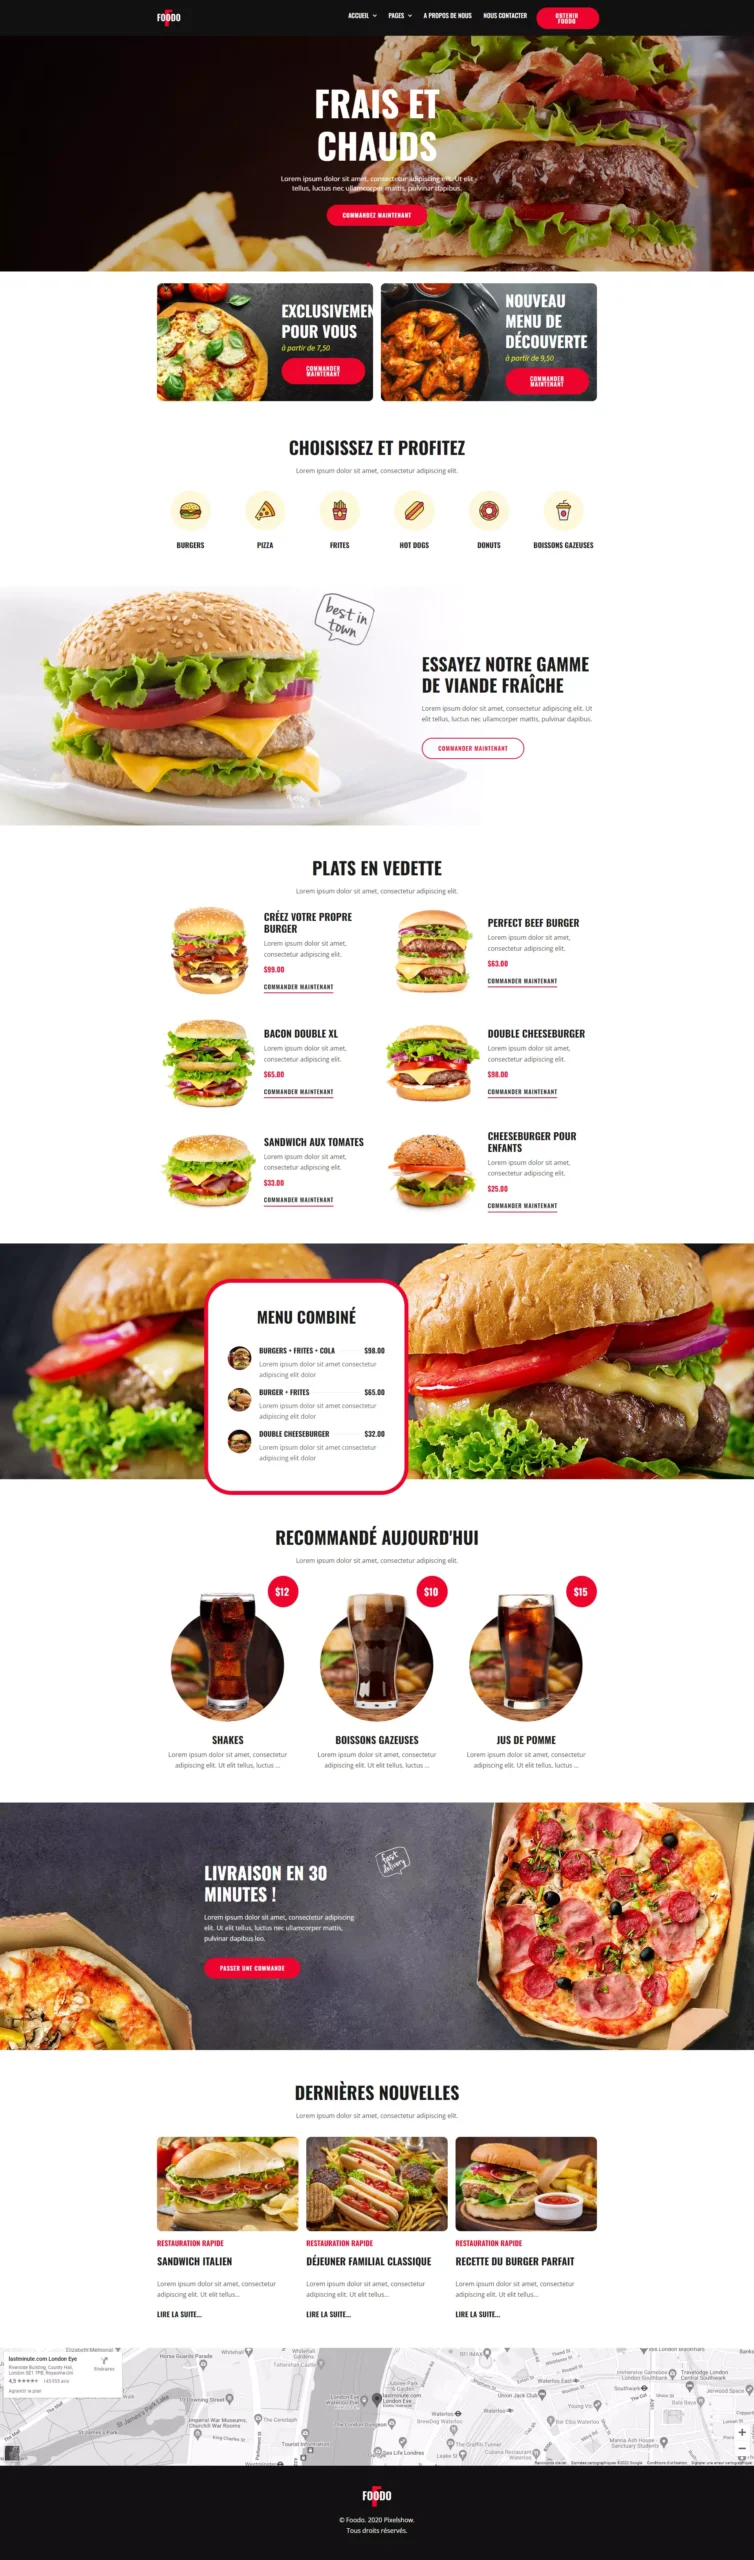 exemple-site-internet-fast-food